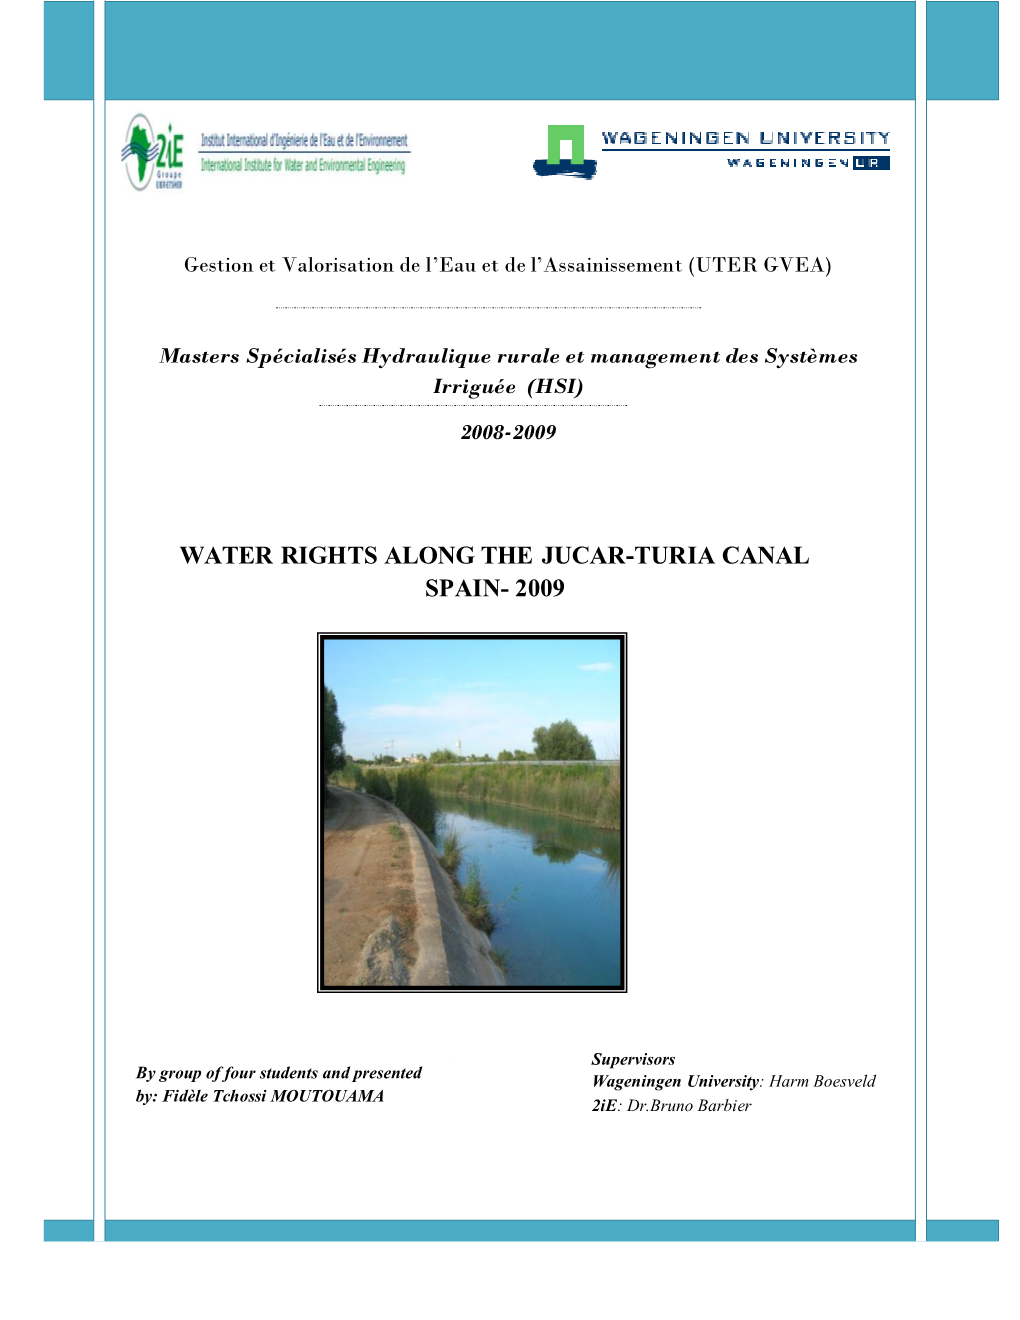 Water Rights Along the Jucar-Turia Canal Spain- 2009